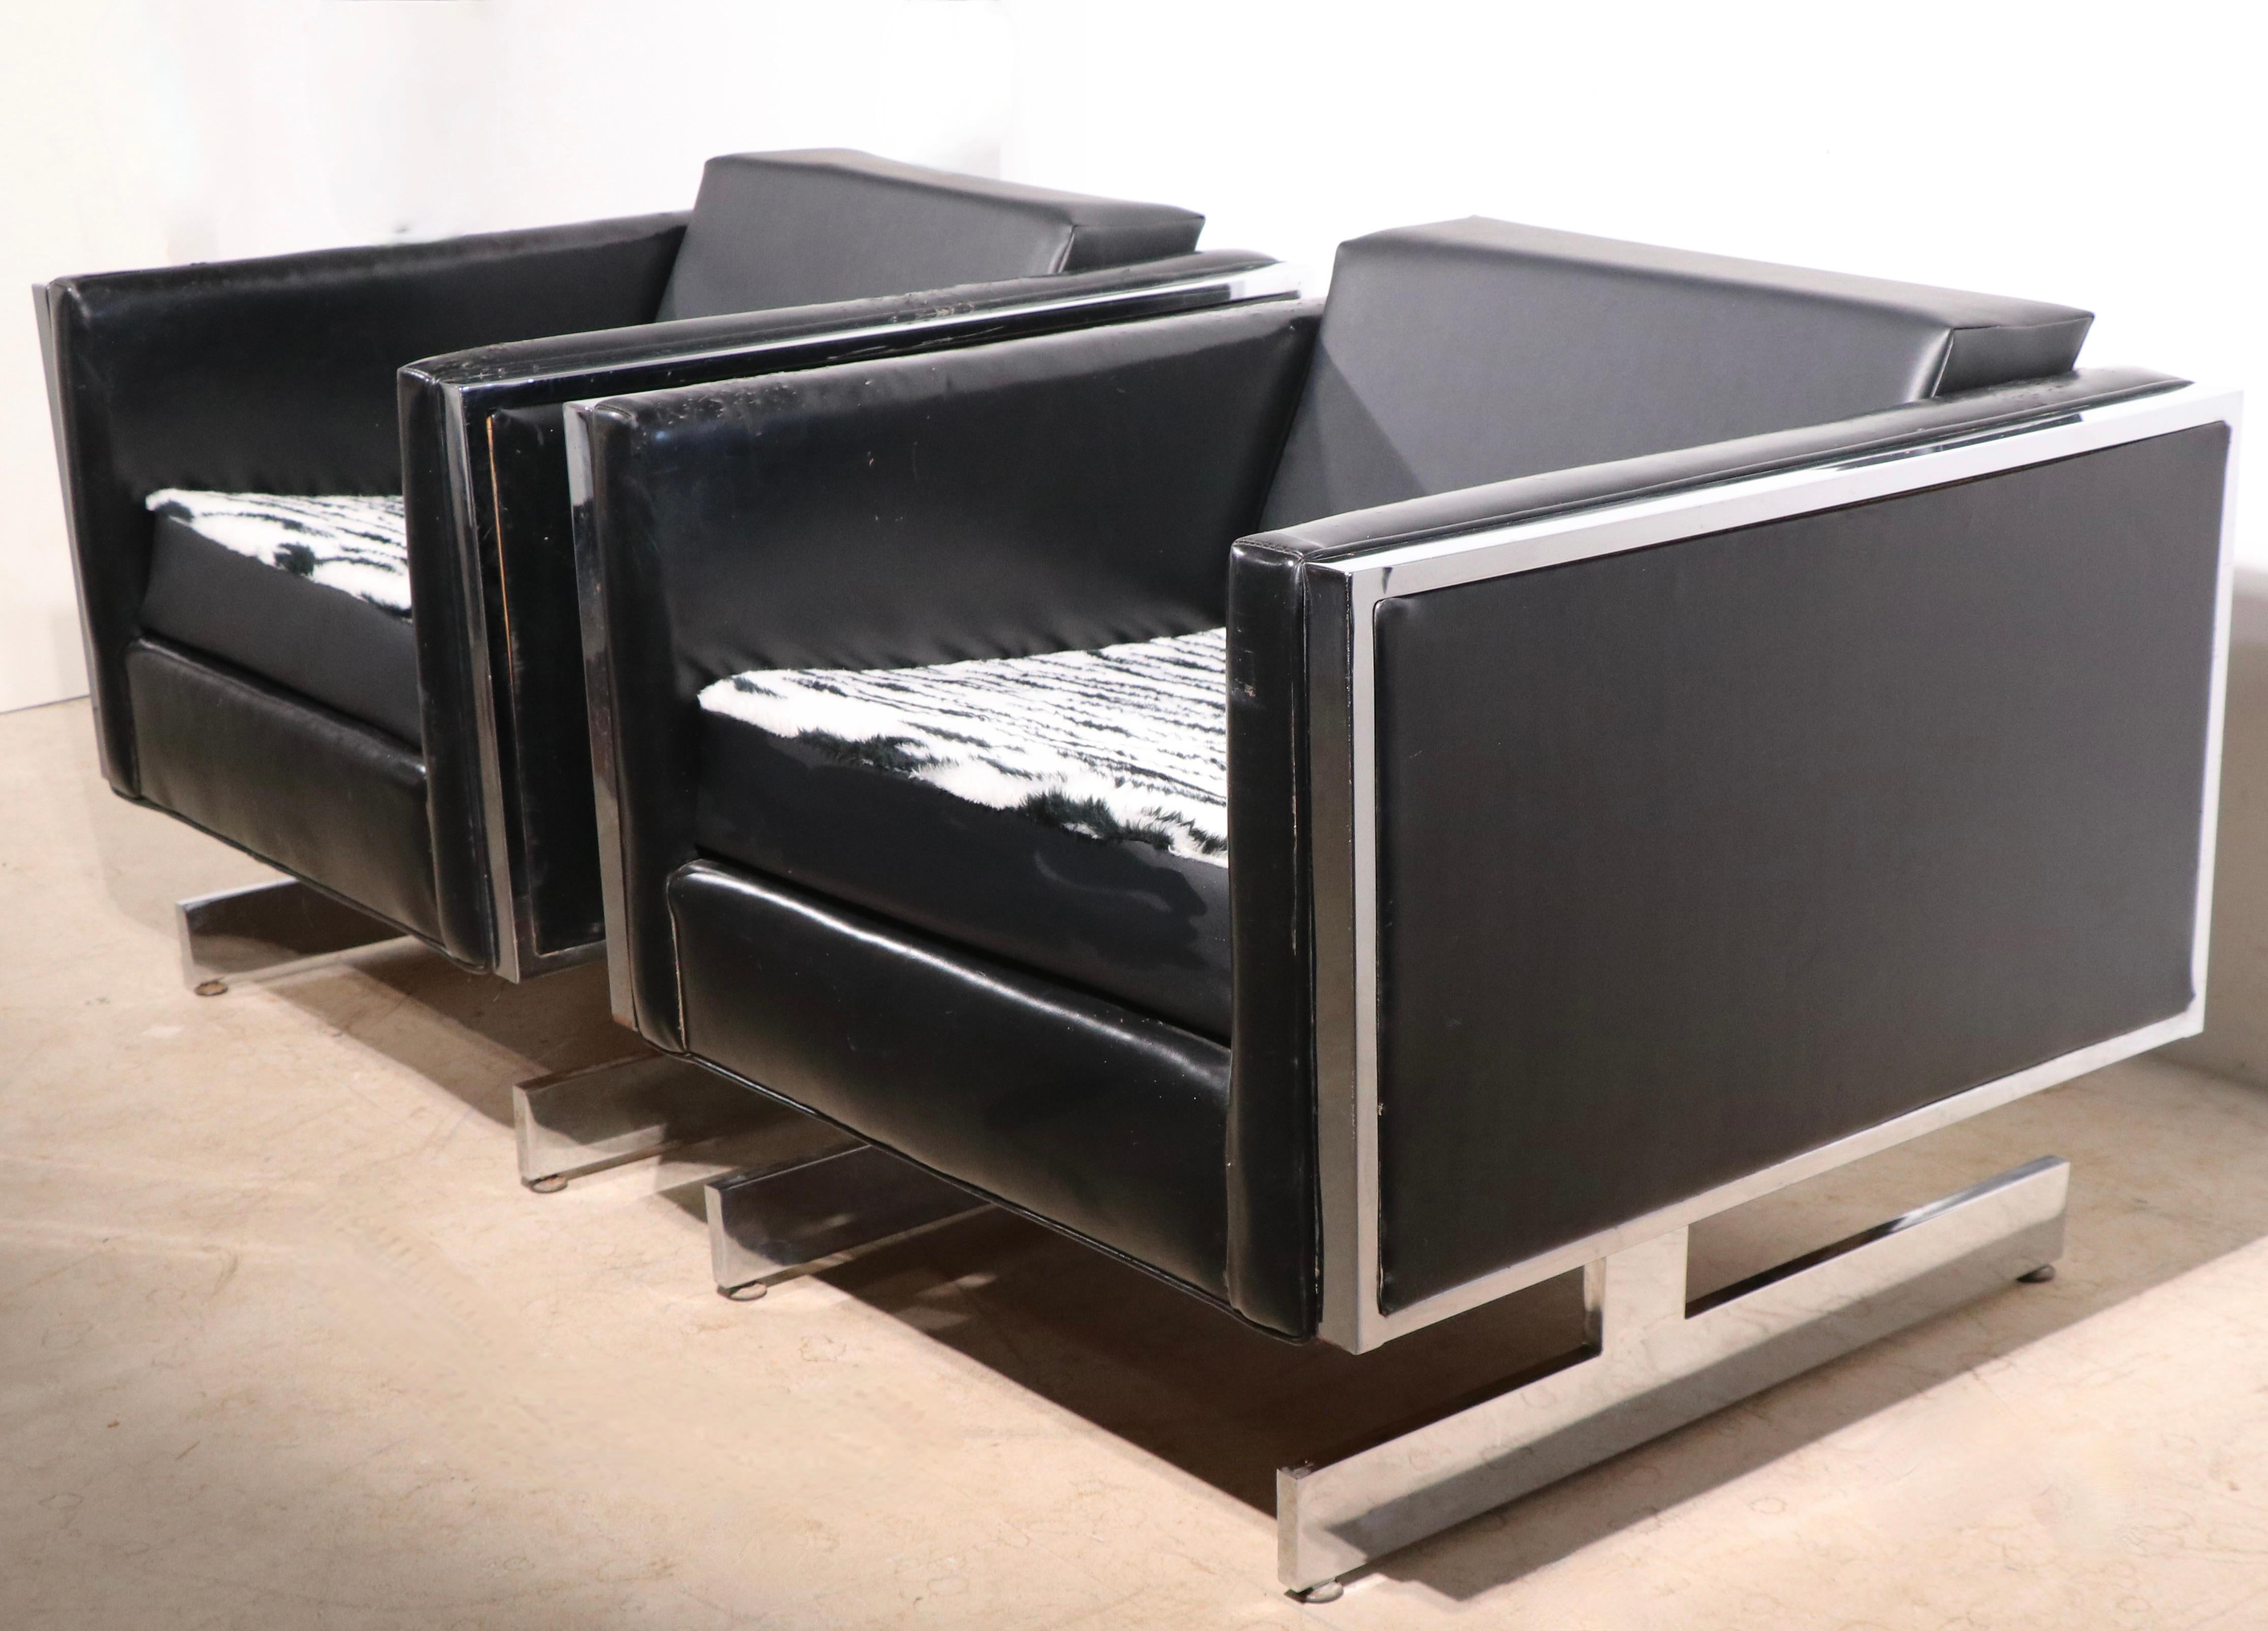 Chic pair of black and chrome cube form lounge chairs, by the Patrician Furniture Company circa 1970's. The chairs feature angular chrome legs, with a cube form seat, of black vinyl and faux leopard, or cheetah, fur on the seats. The cars also have